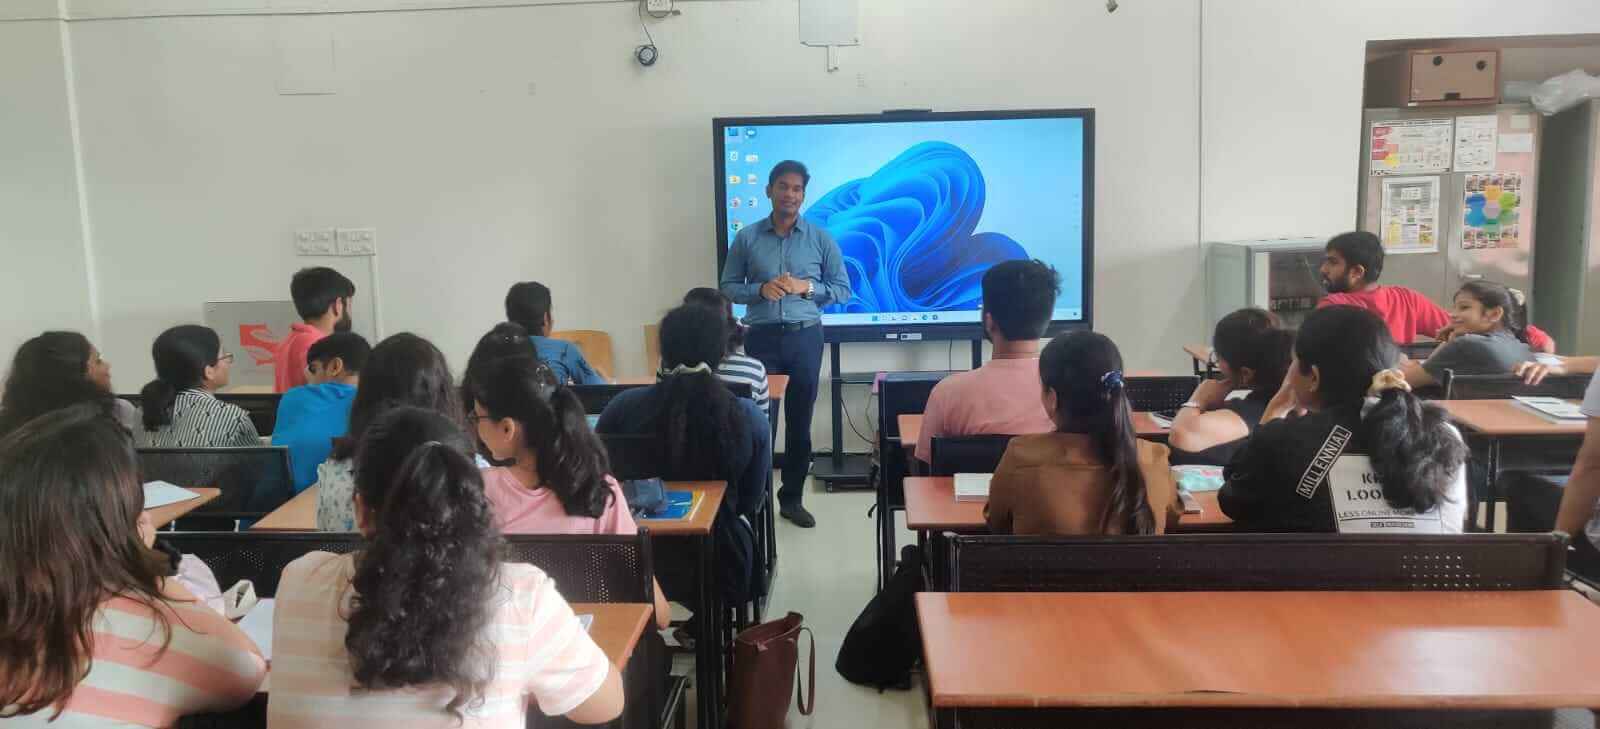 Mr. Ratnesh Johnson, Biotechnologist Serum Institute of India Limited 25th July 2022. Lecture Title: Career Opportunities for Biotechnologists